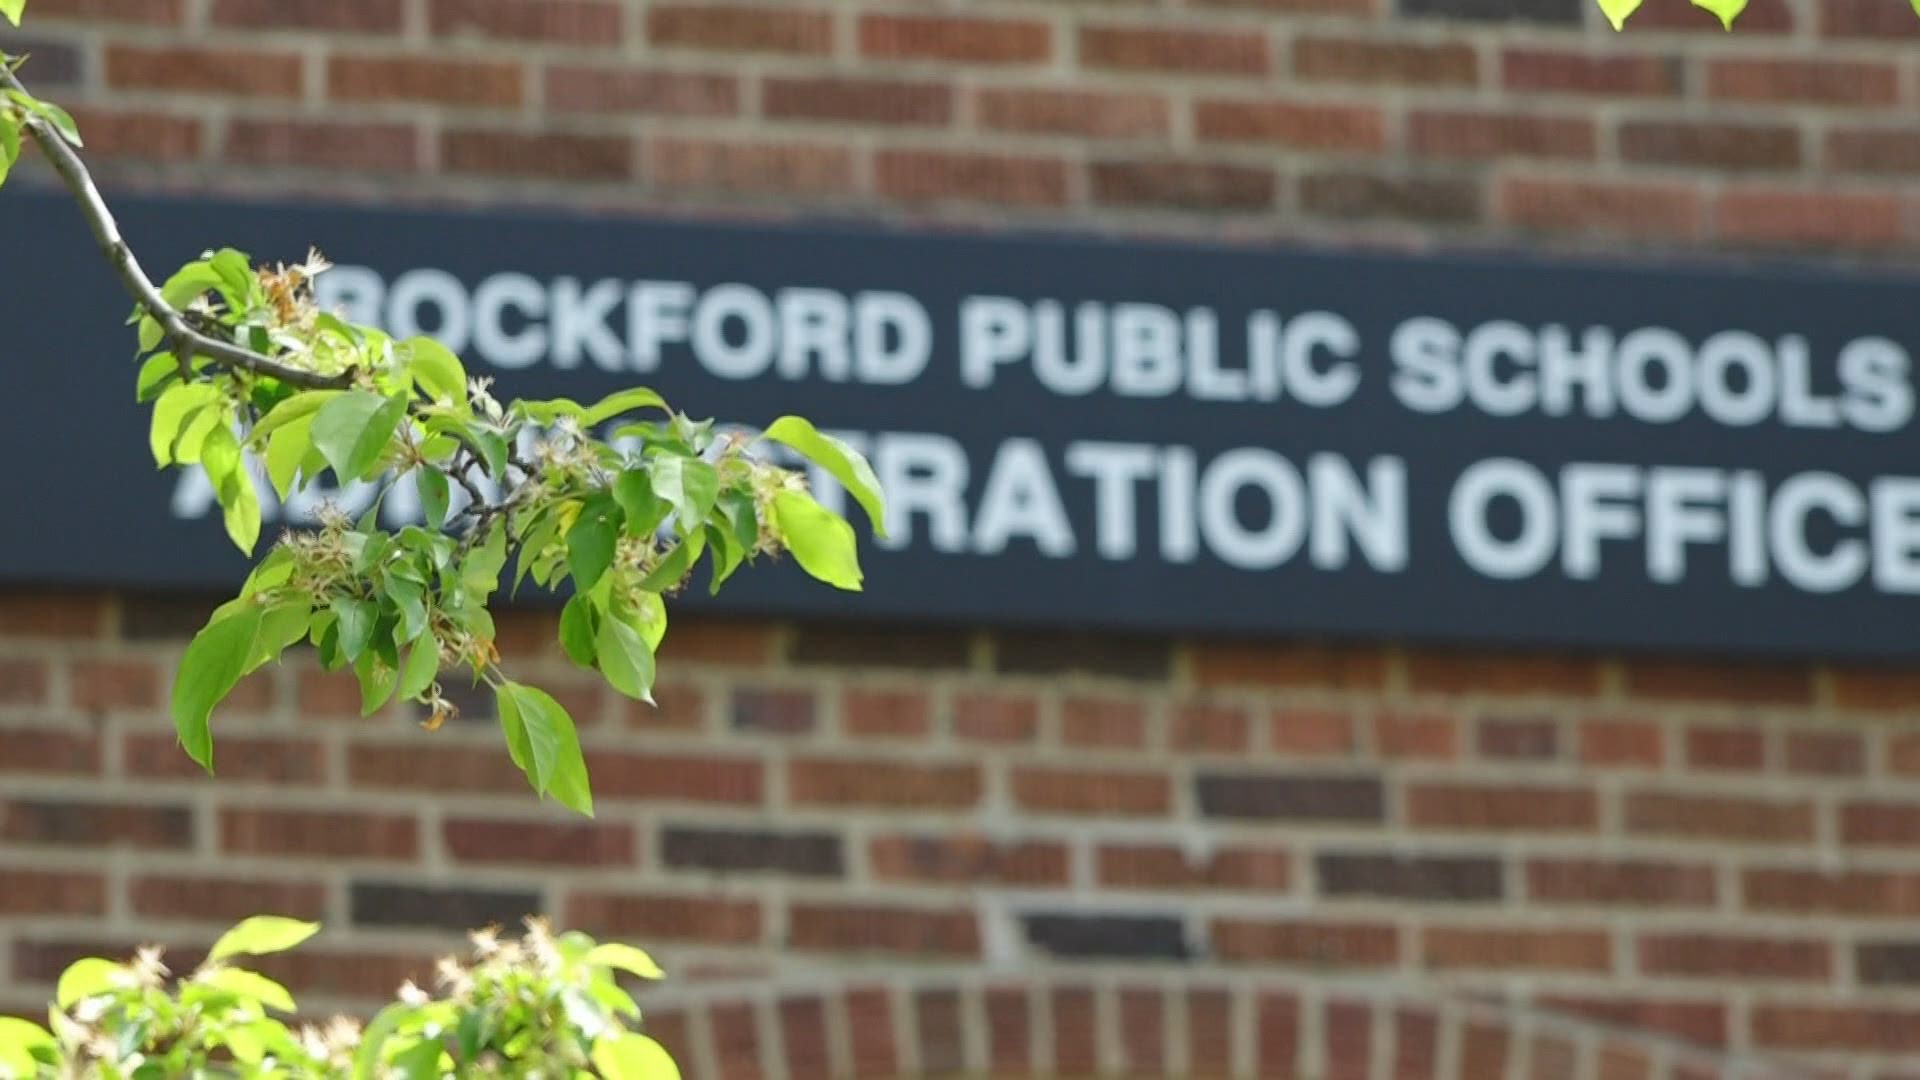 "We're thinking of a different than traditional summer school," said Mike Ramm, assistant superintendent at Rockford Public Schools.